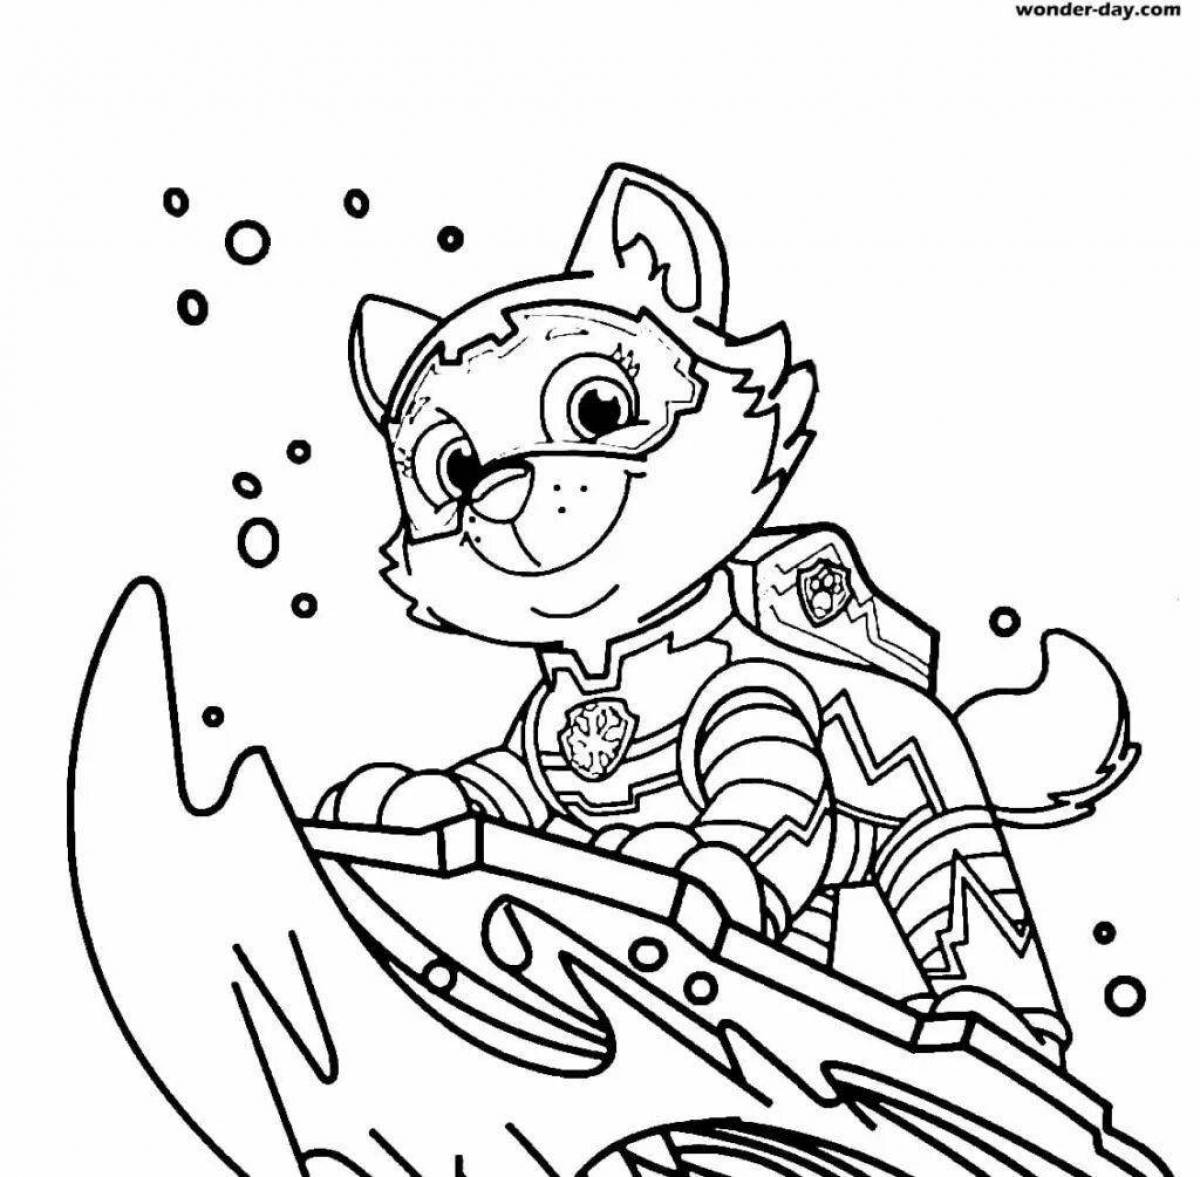 Outstanding super patrol paw patrol coloring page